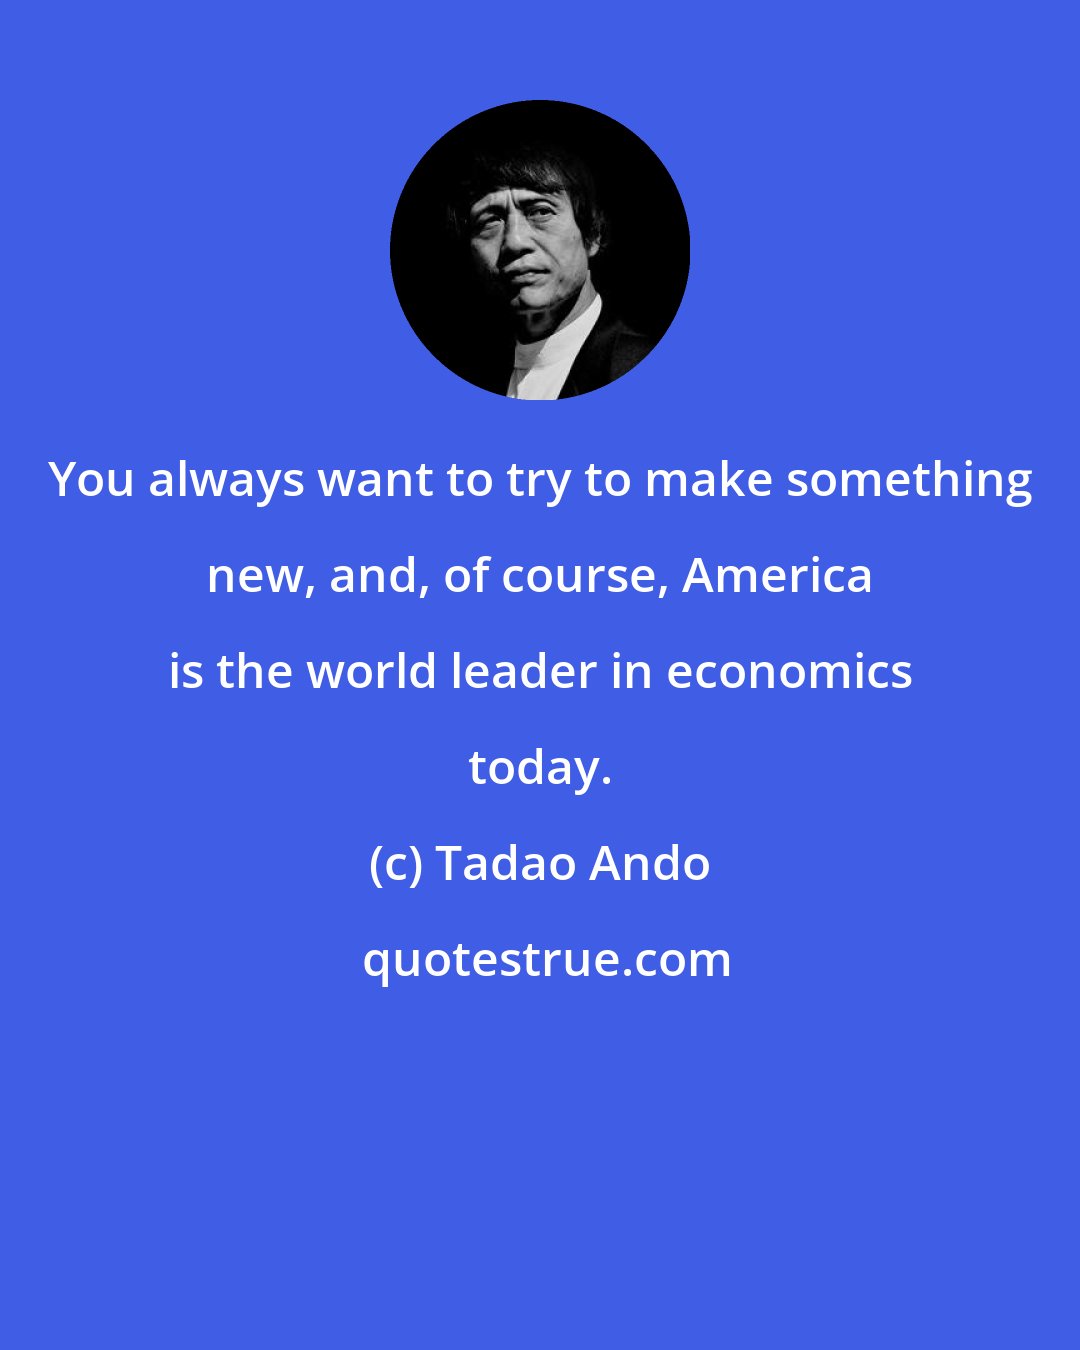 Tadao Ando: You always want to try to make something new, and, of course, America is the world leader in economics today.